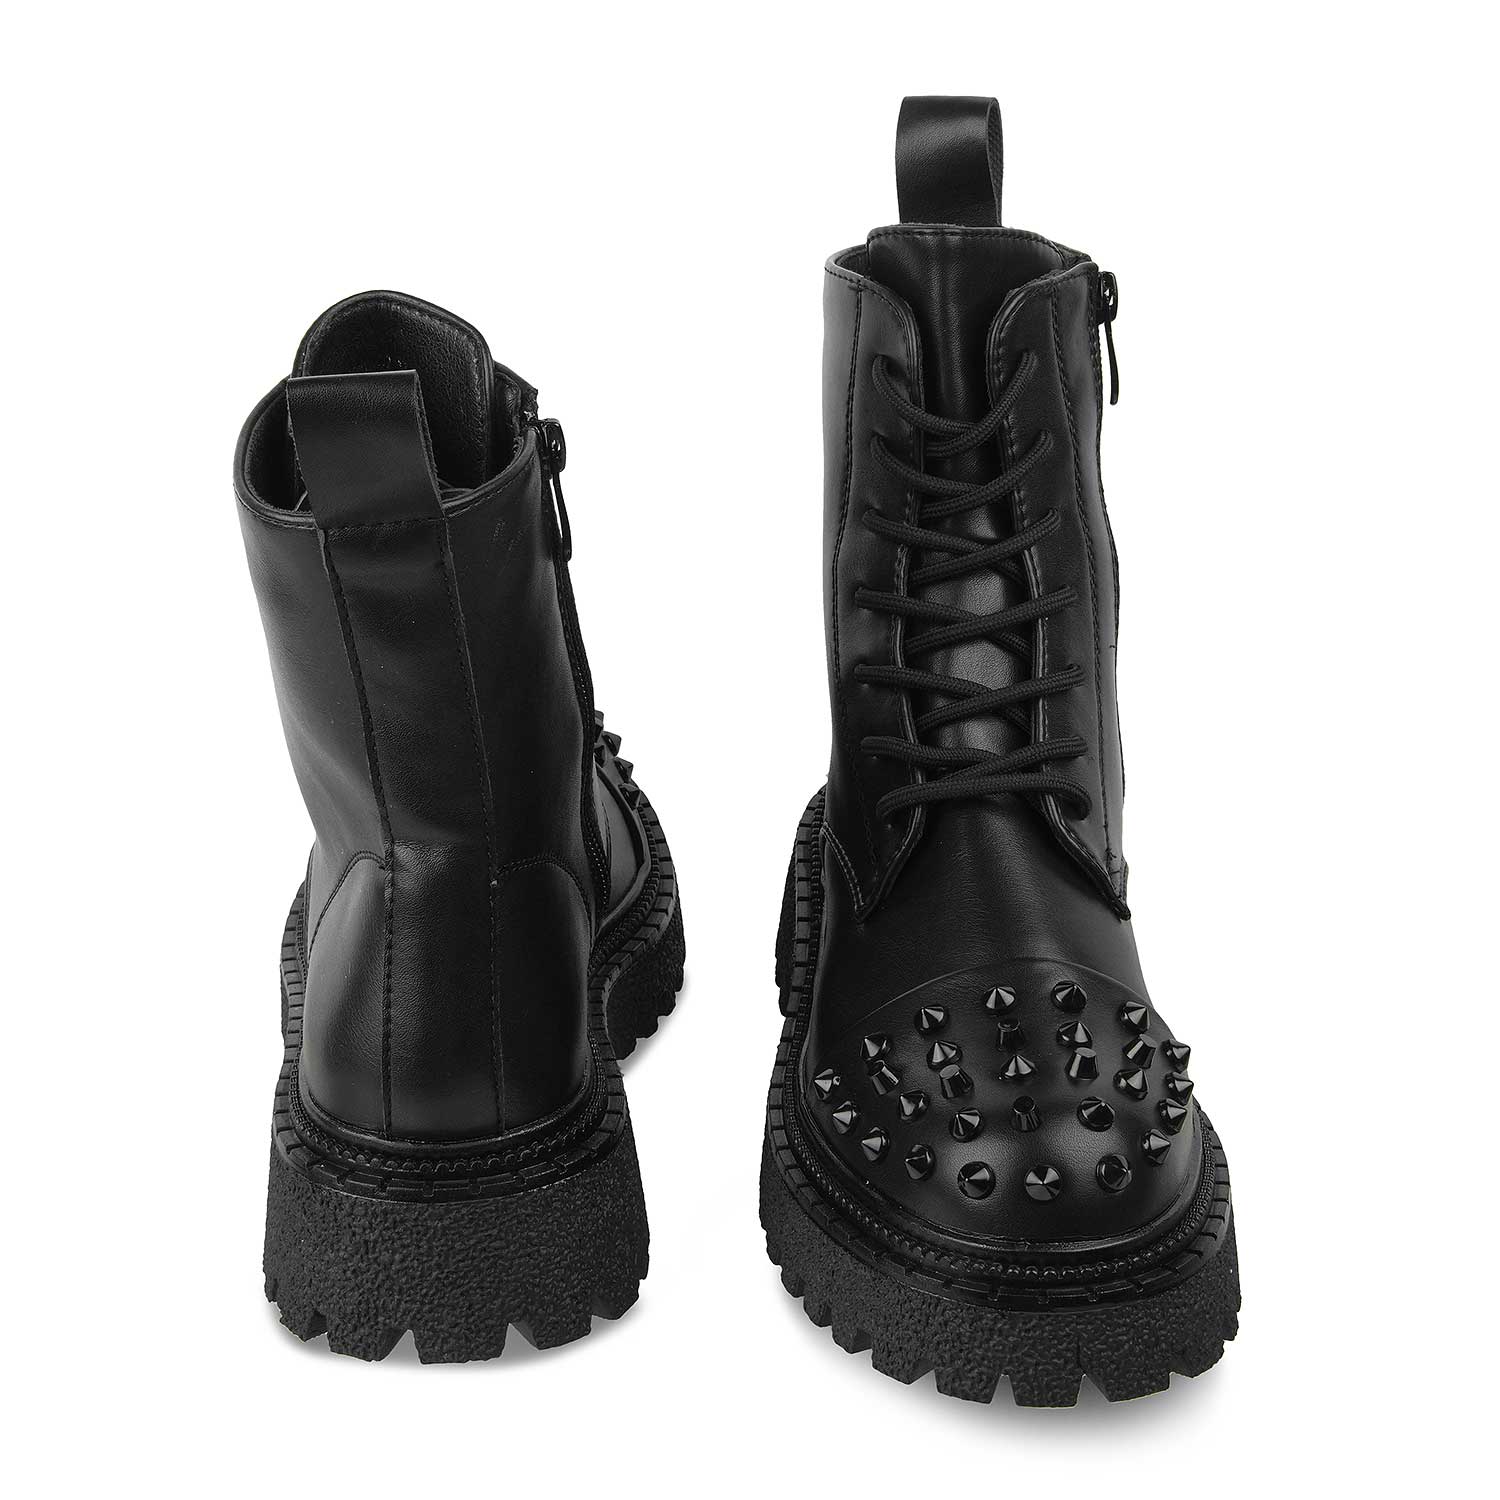 The Forcay Black Women's Boots Tresmode